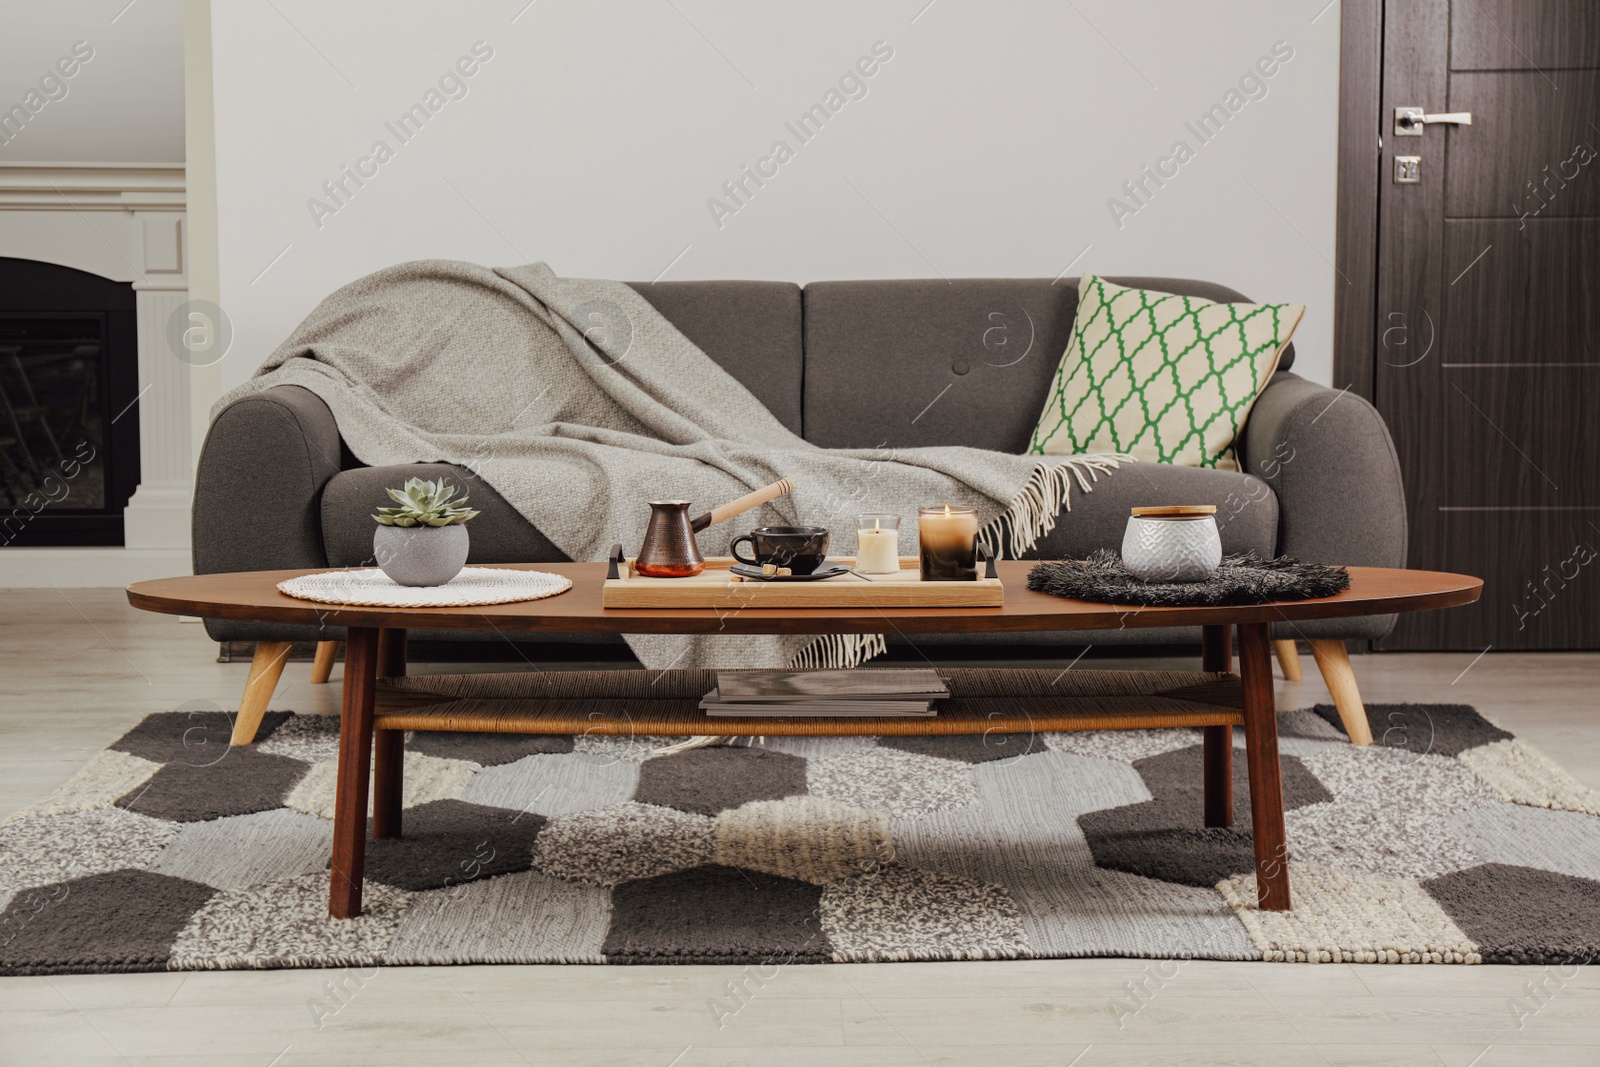 Photo of Freshly brewed coffee and decorative elements on wooden table near sofa in living room